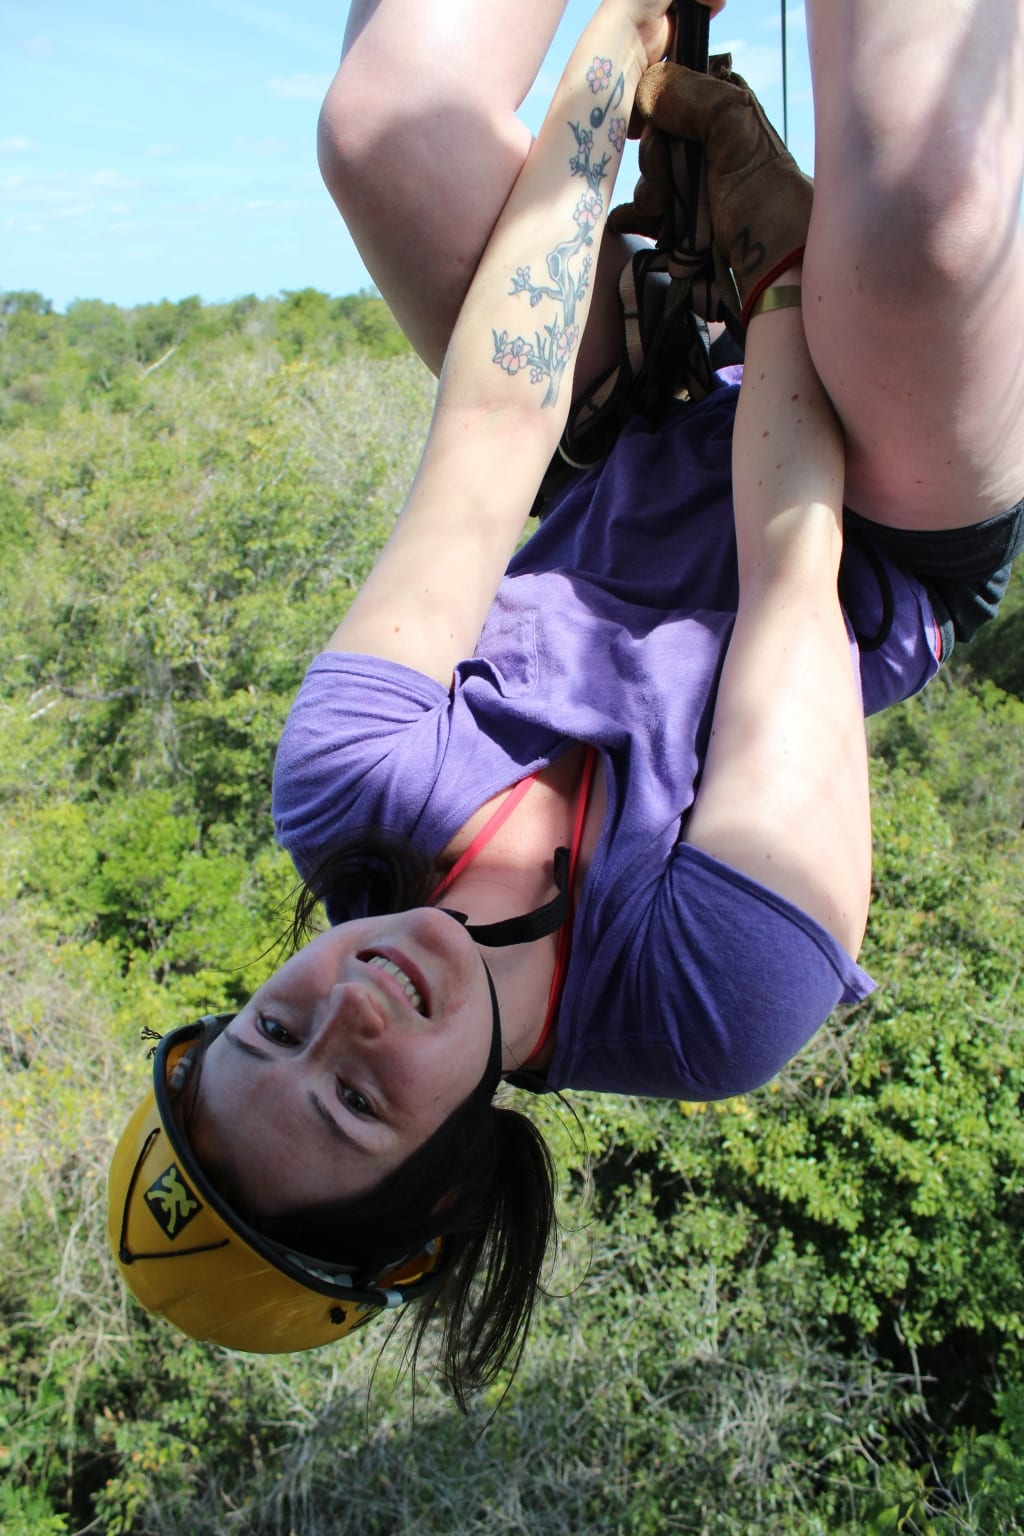 Zip-lining upside down over the tops of trees.